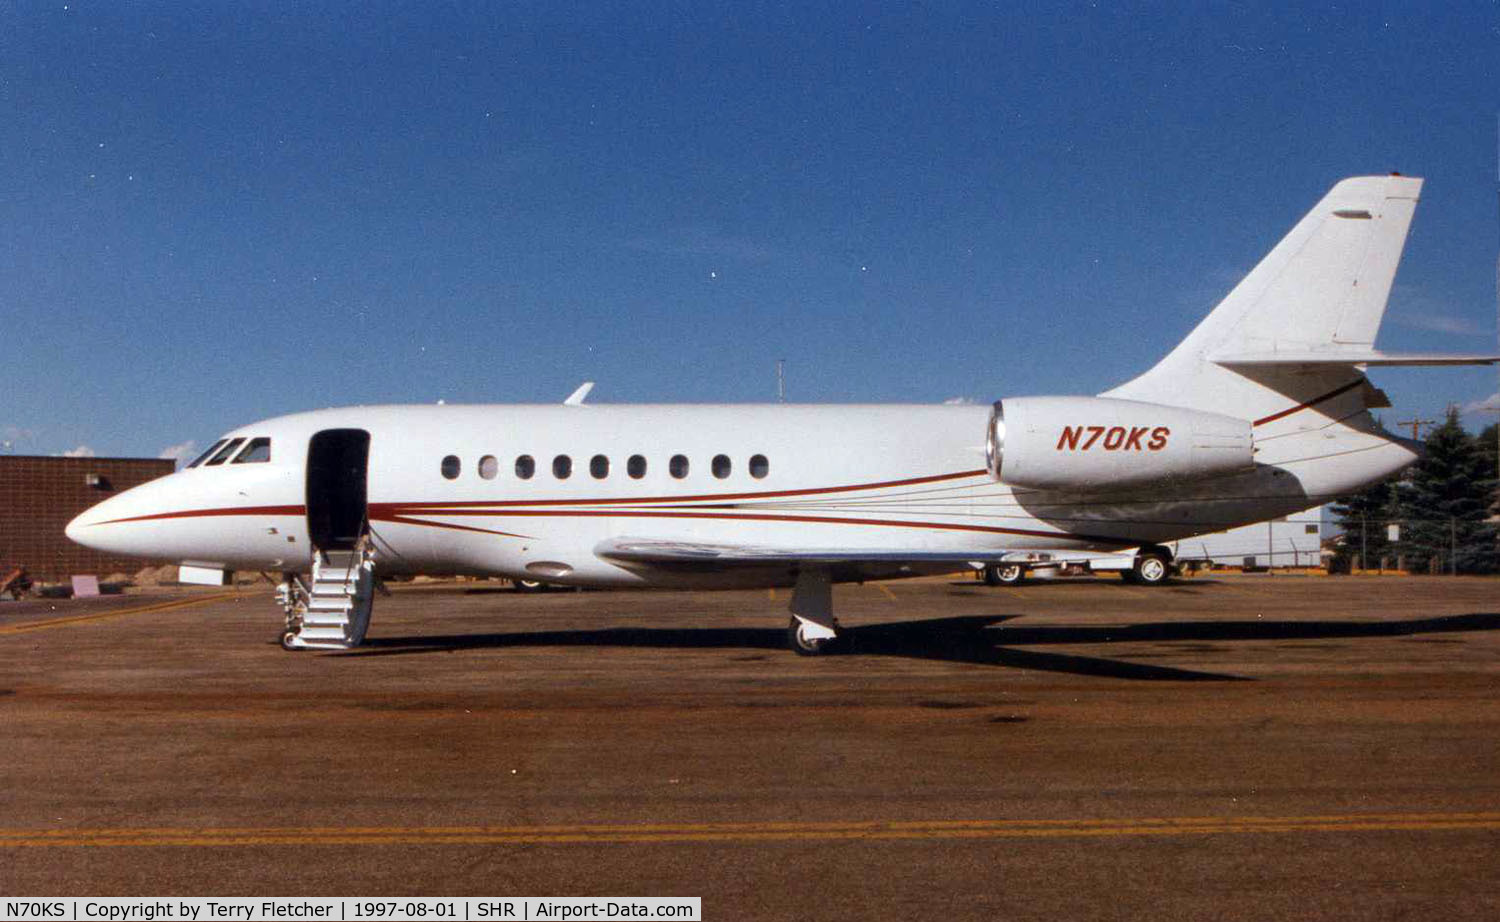 N70KS, 1995 Dassault Falcon 2000 C/N 14, A whistlestop at Sheridan for a photo in 1997 - and the wife and I got invited by the pilot to 'take a look inside'